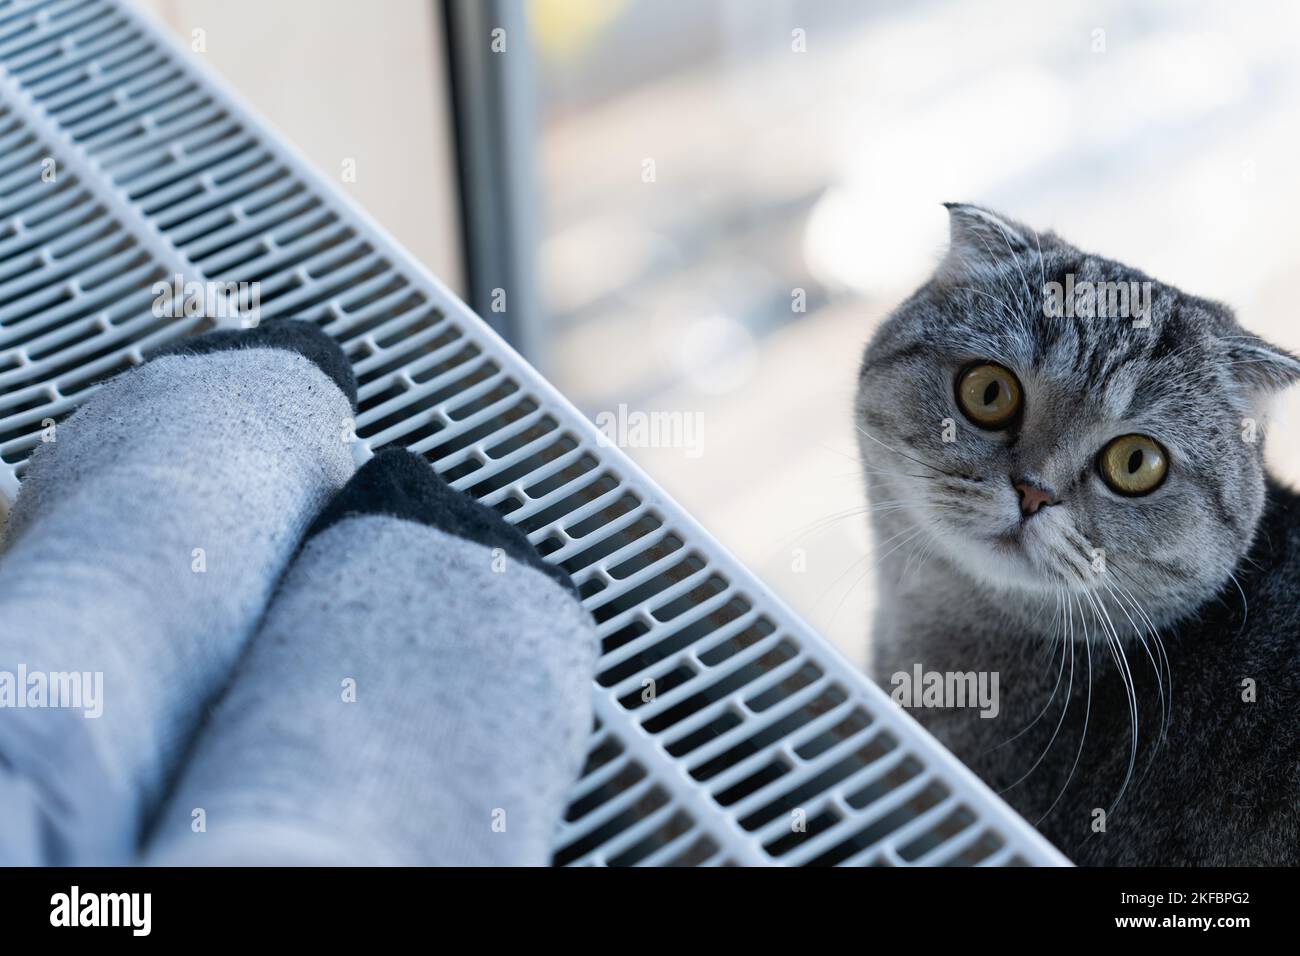 A person warms his feet in the warm socks of the house on the heating radiator. The cat sits next to you and looks at the owner Stock Photo